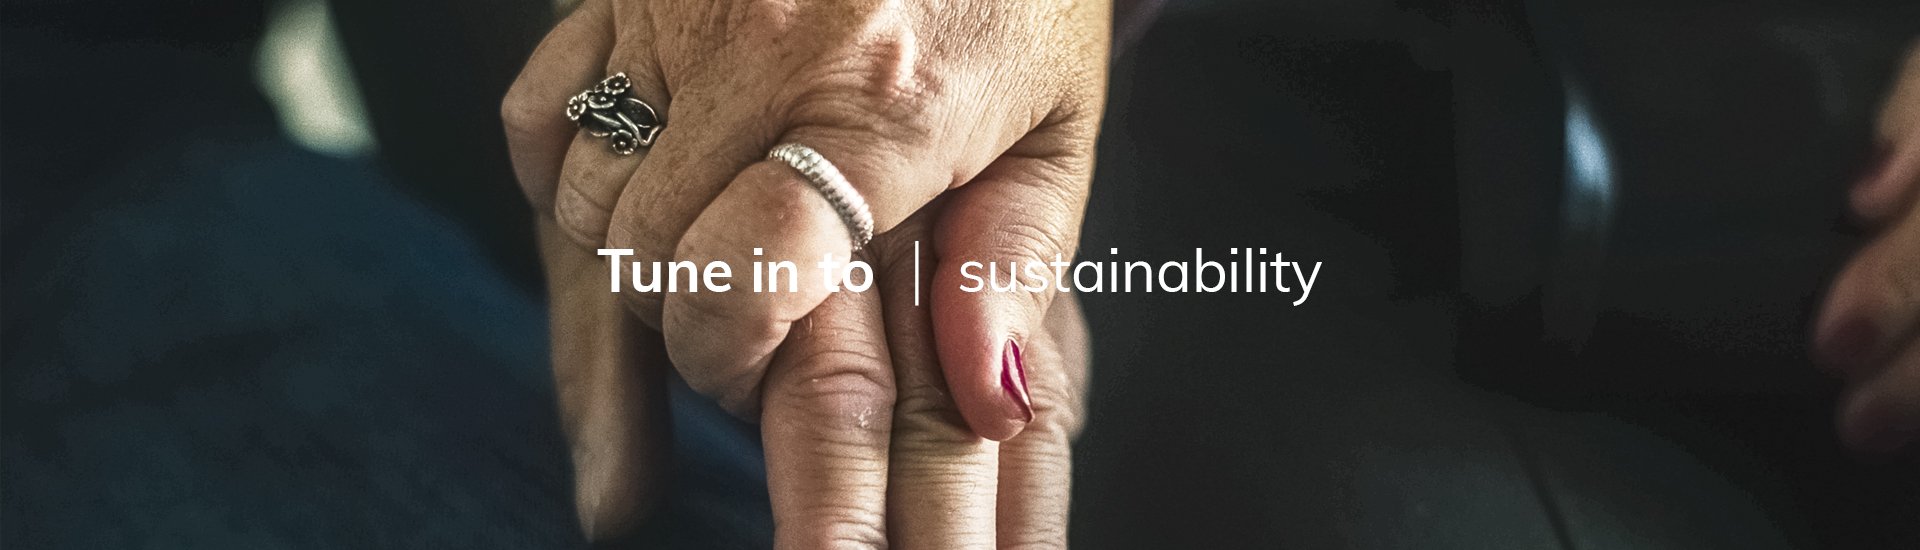 tune-in-to-sustainability-holding-hands